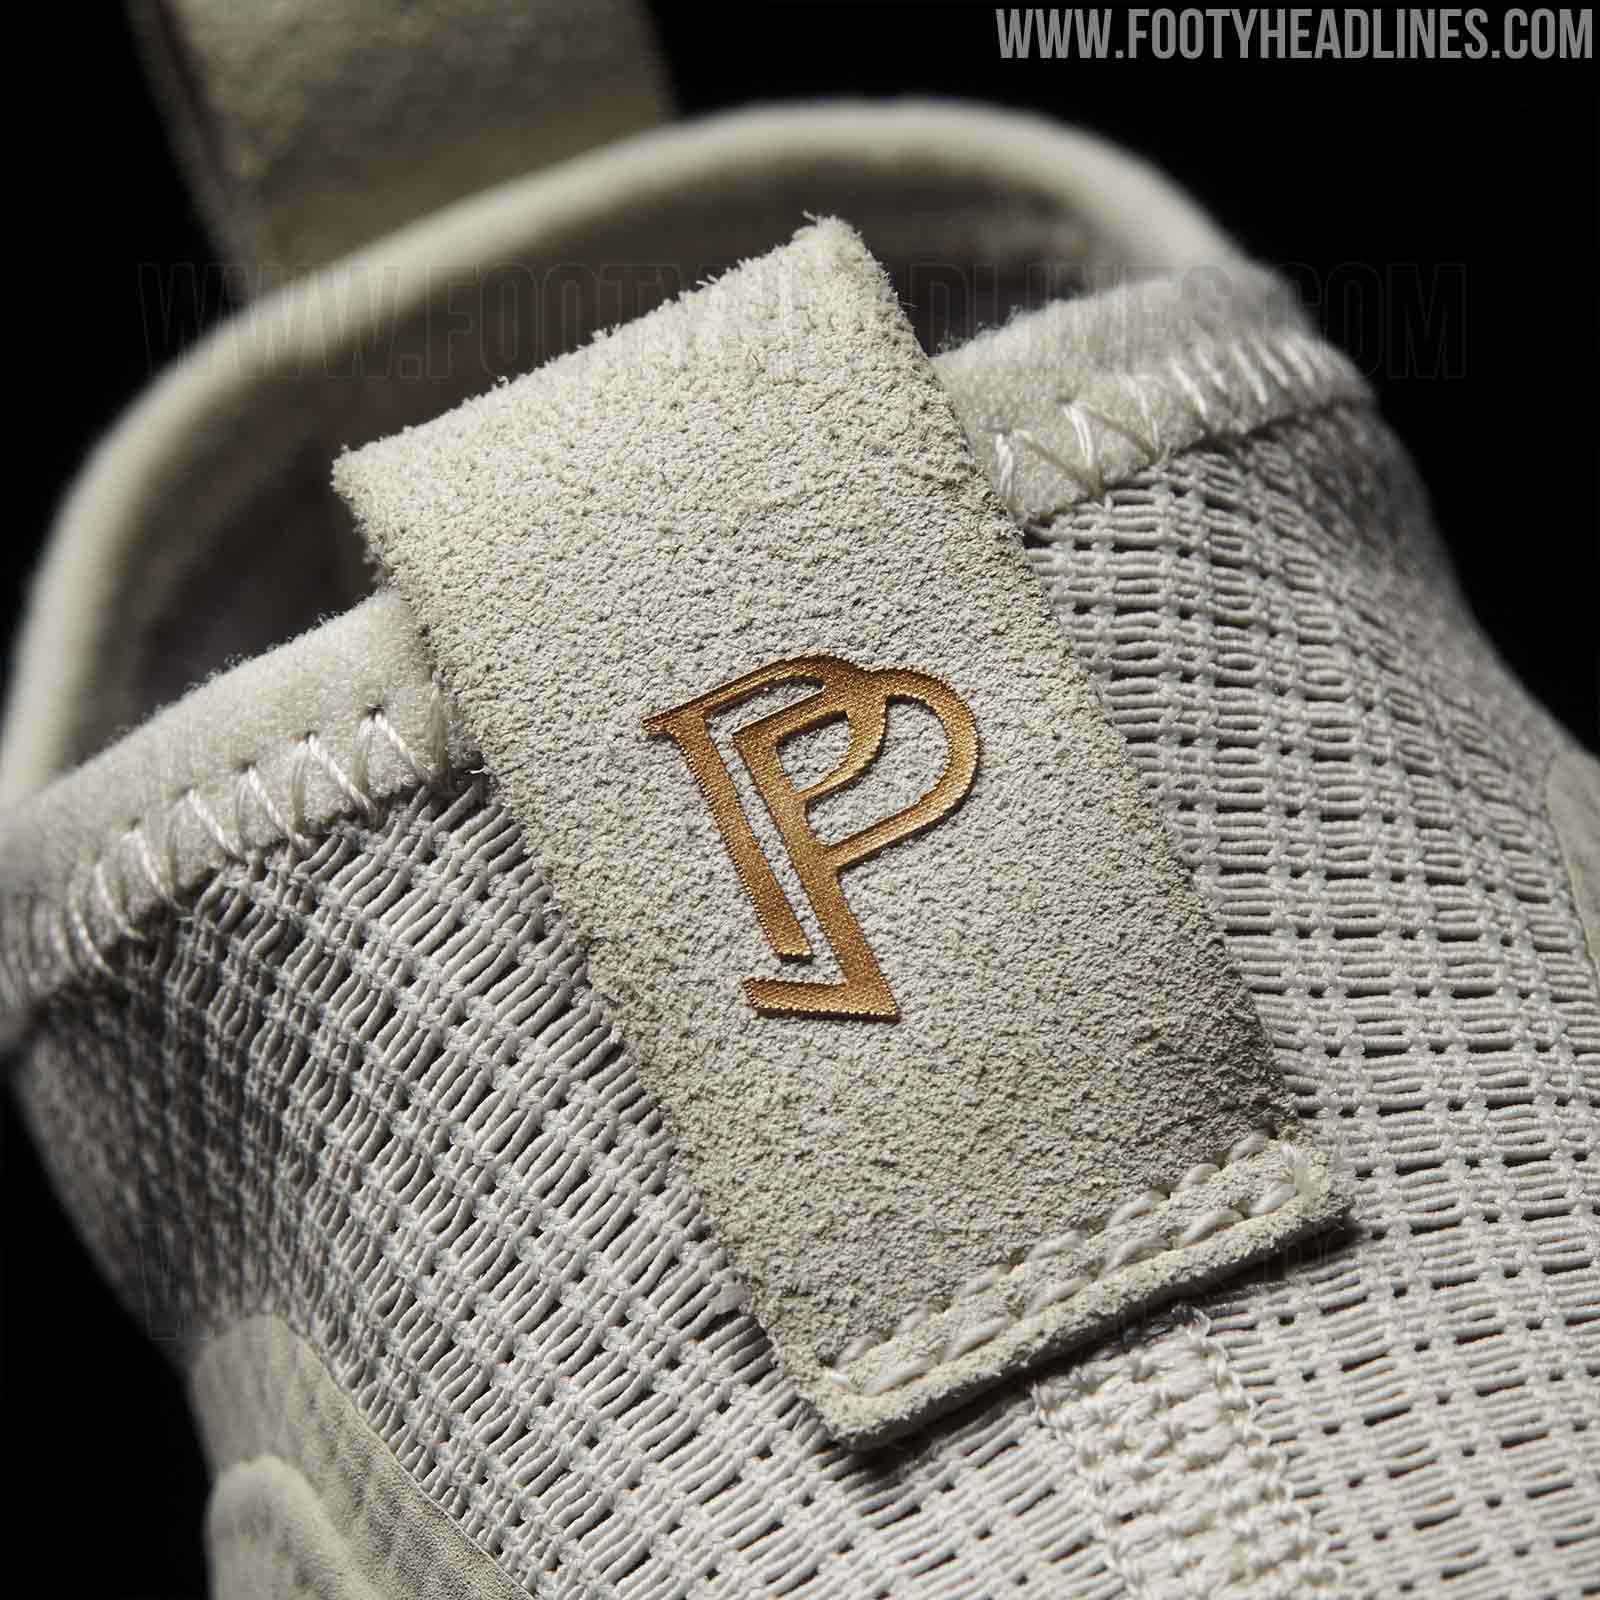 Ace Purecontrol Pogba Collection Season 2 Trainers Released - Headlines